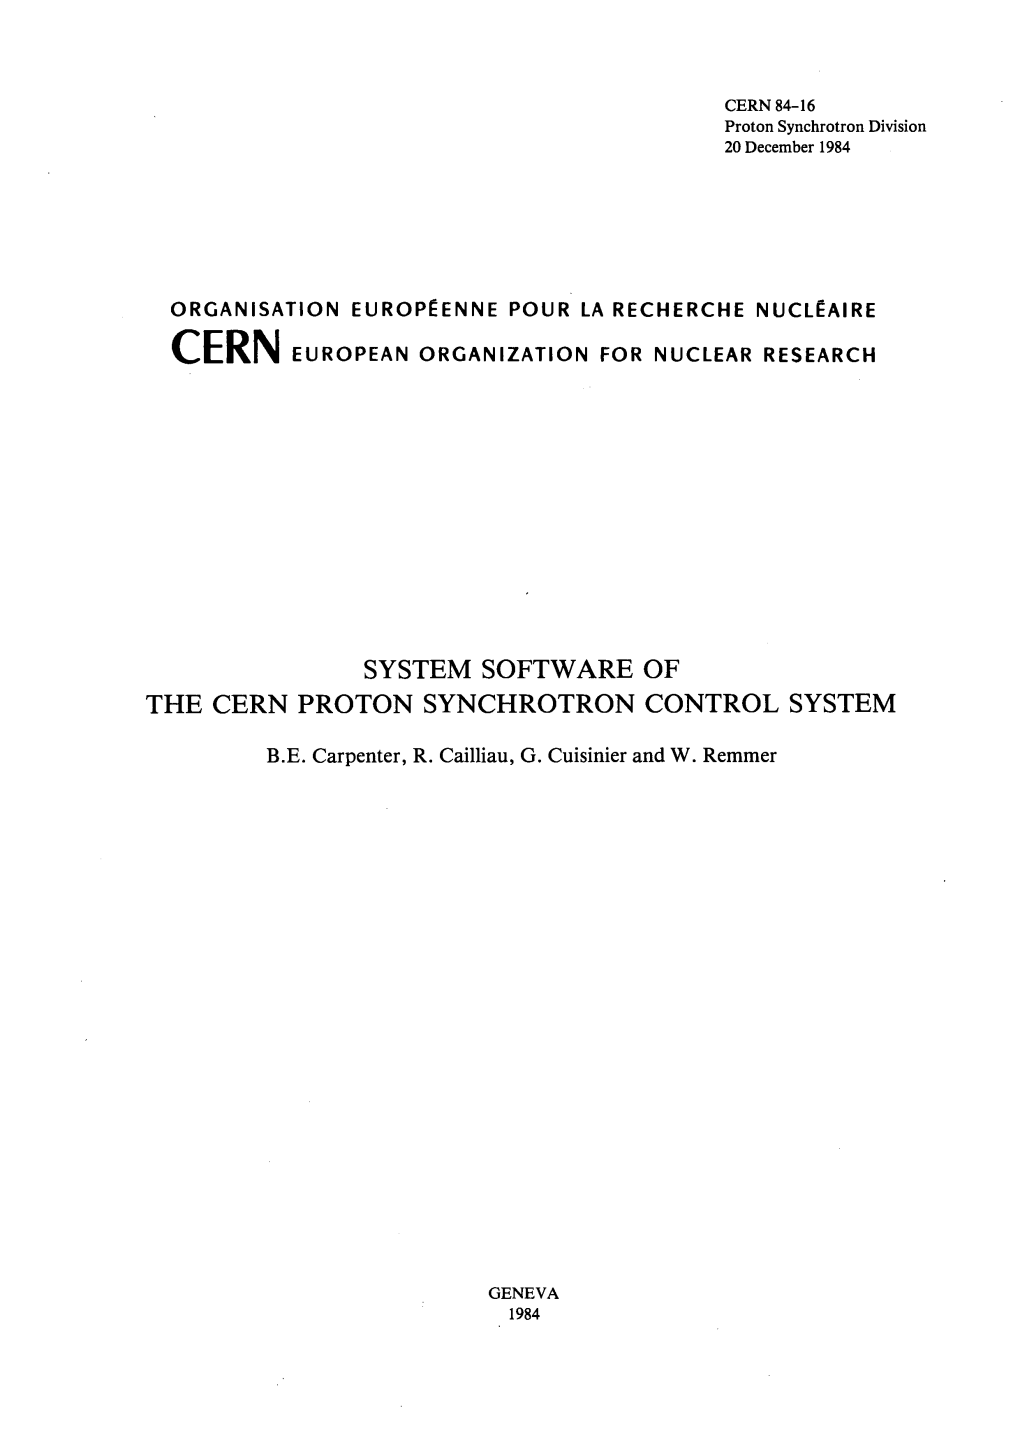 System Software of the Cern Proton Synchrotron Control System